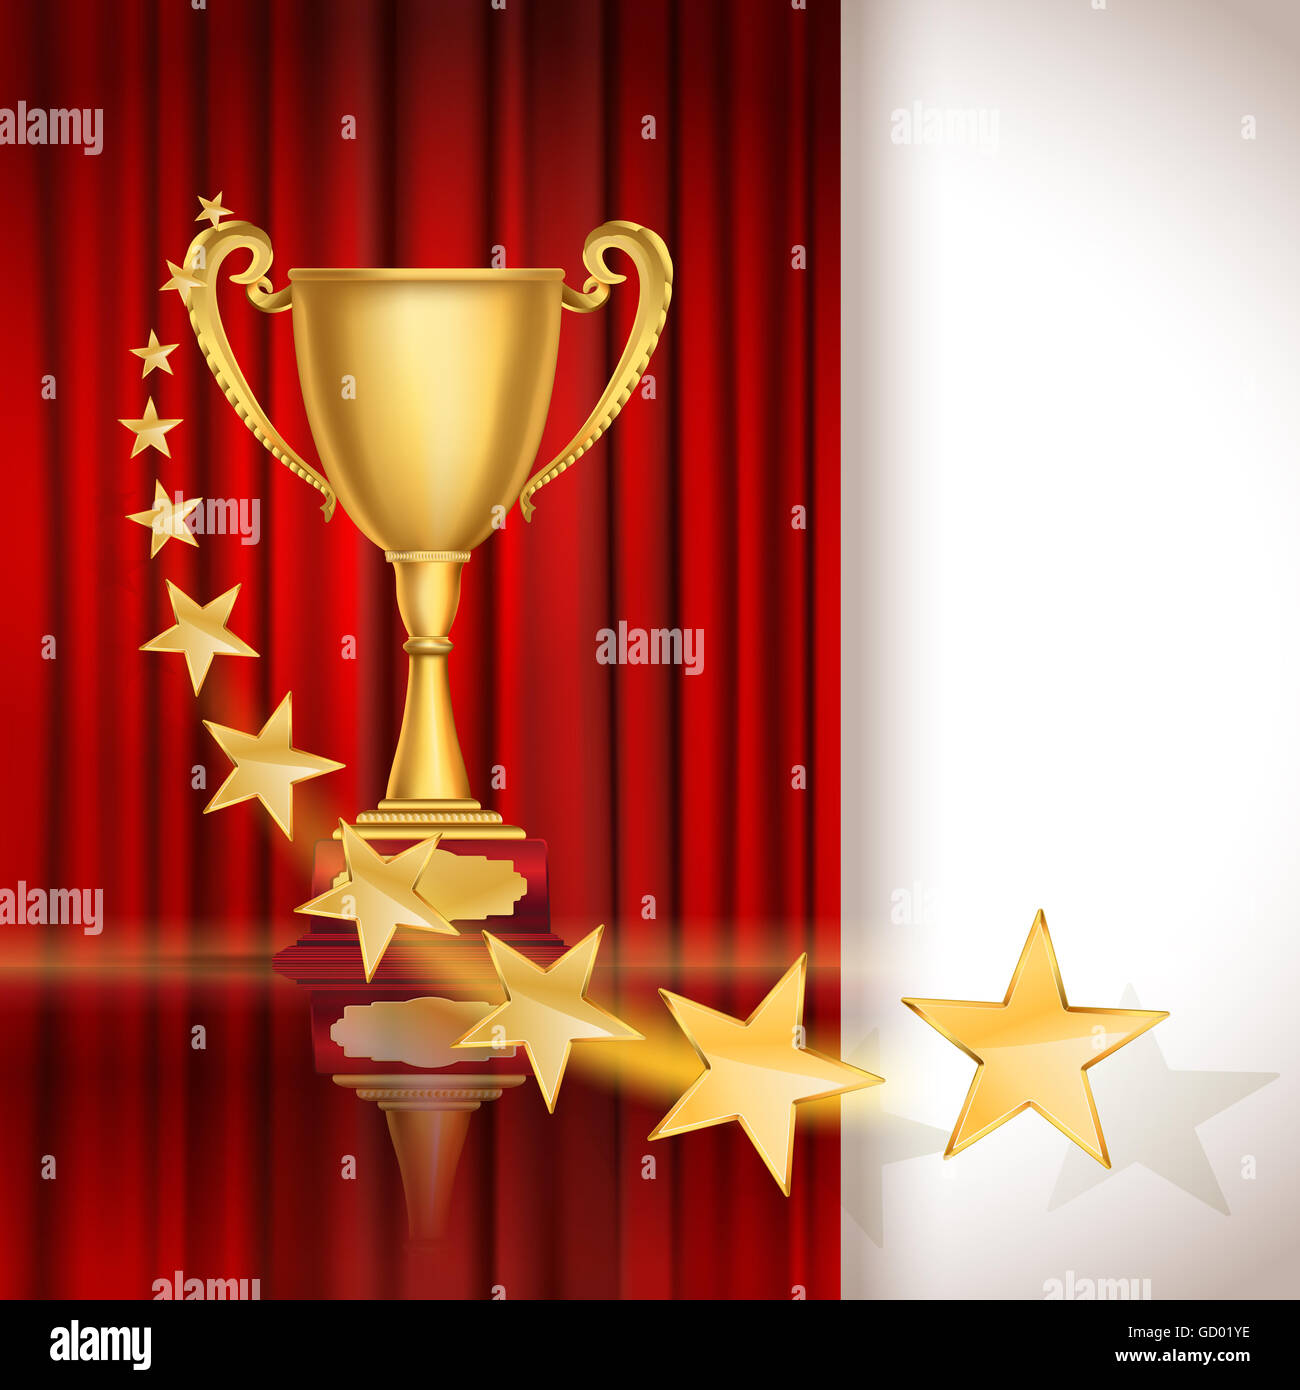 Golden sports cup on red curtain background with stars Stock Photo